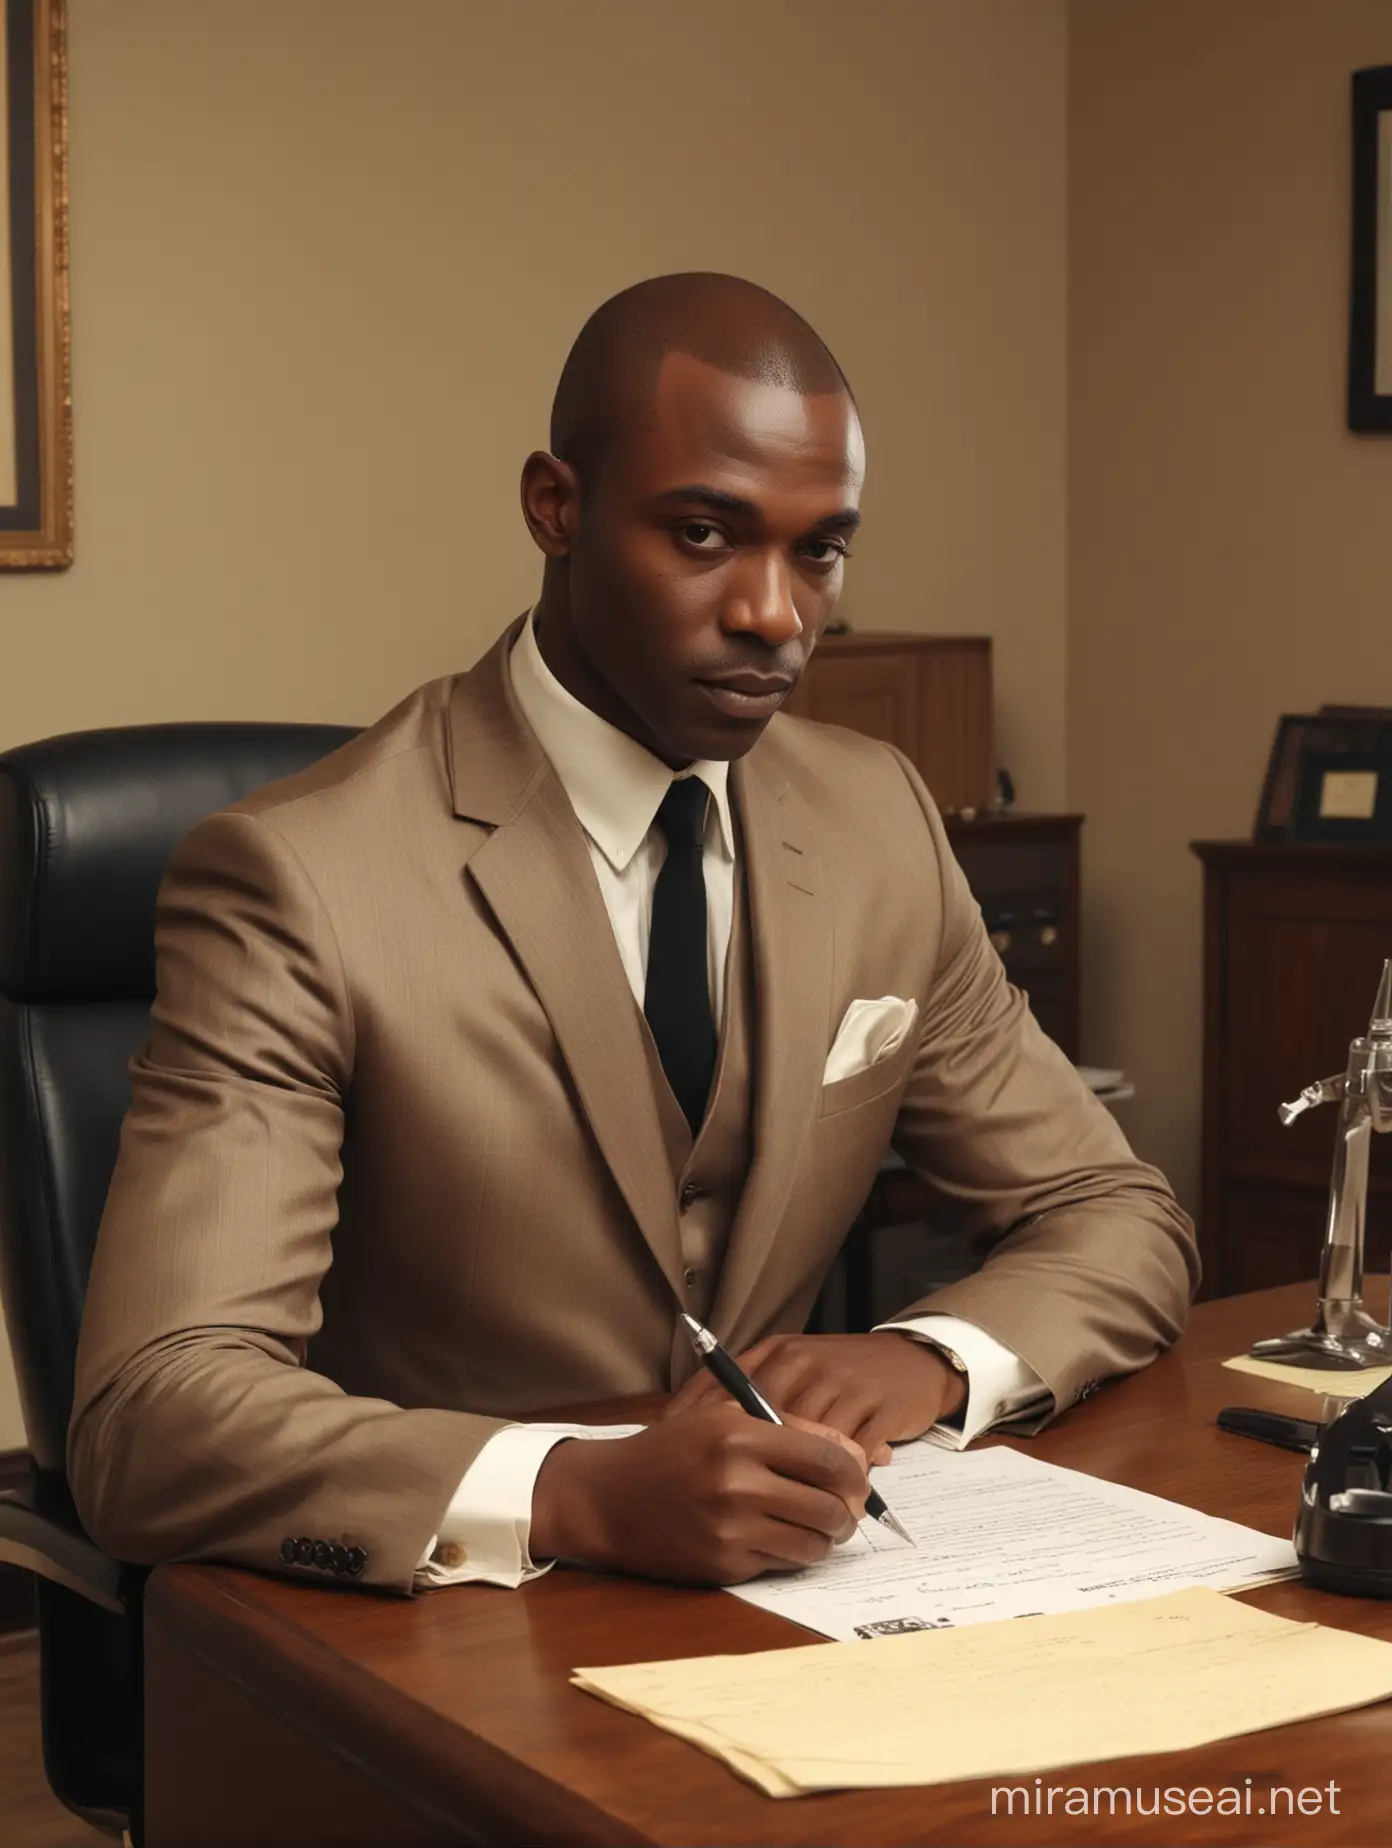 Elegant African American Man Writing a Letter in Retro Office Setting